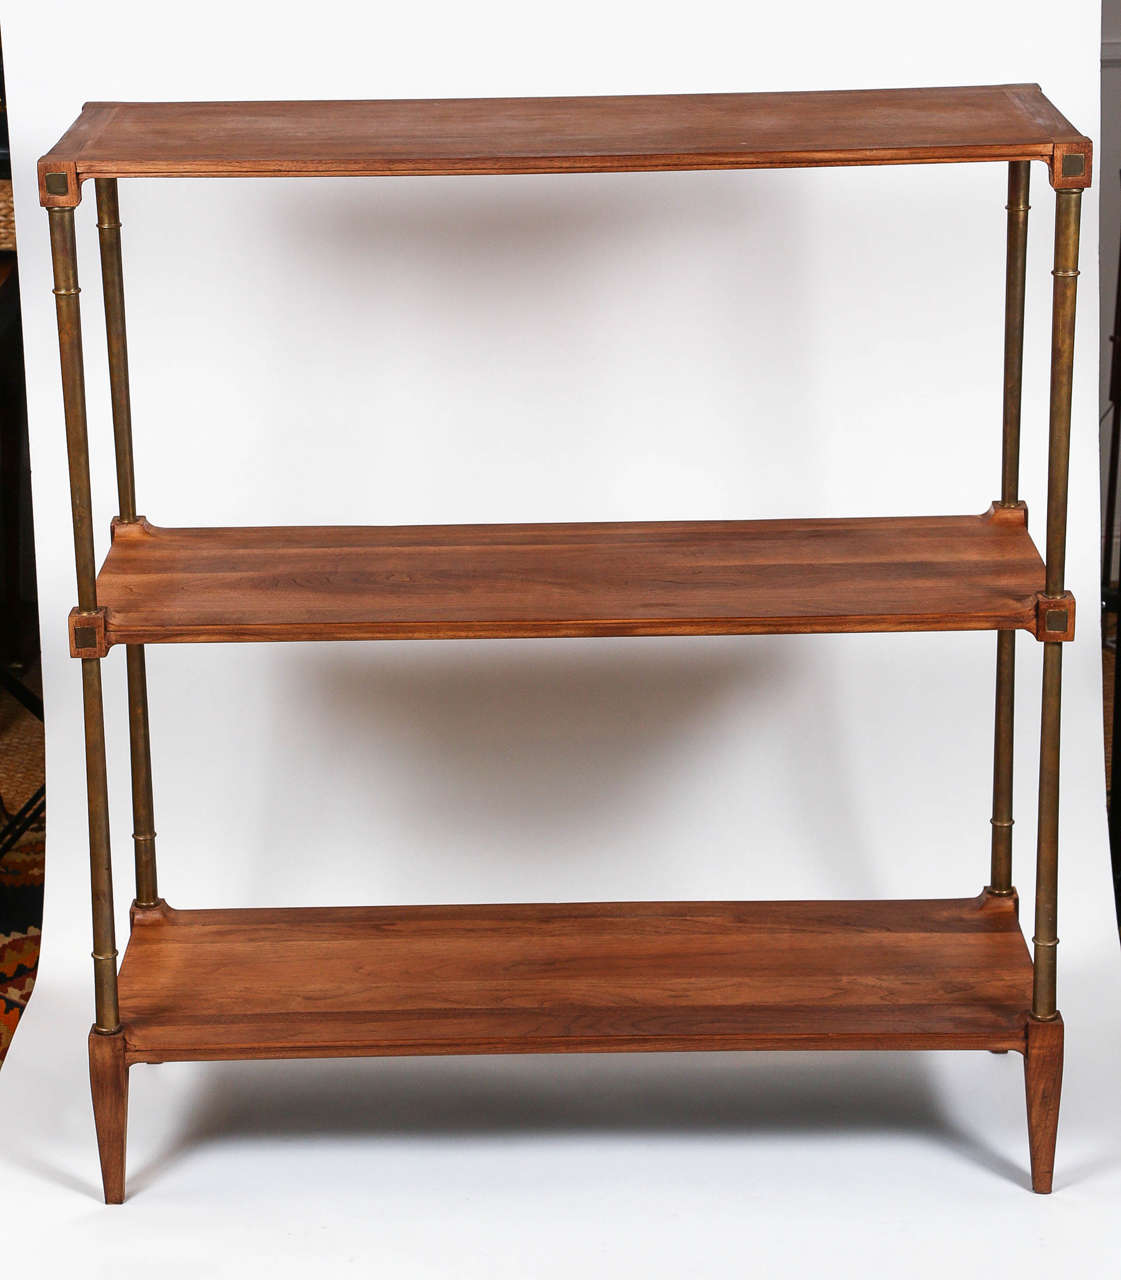 Mid-Century style three-shelf étagère with un-lacquered brass hardware by KB Bespoke. Made in Los Angeles.